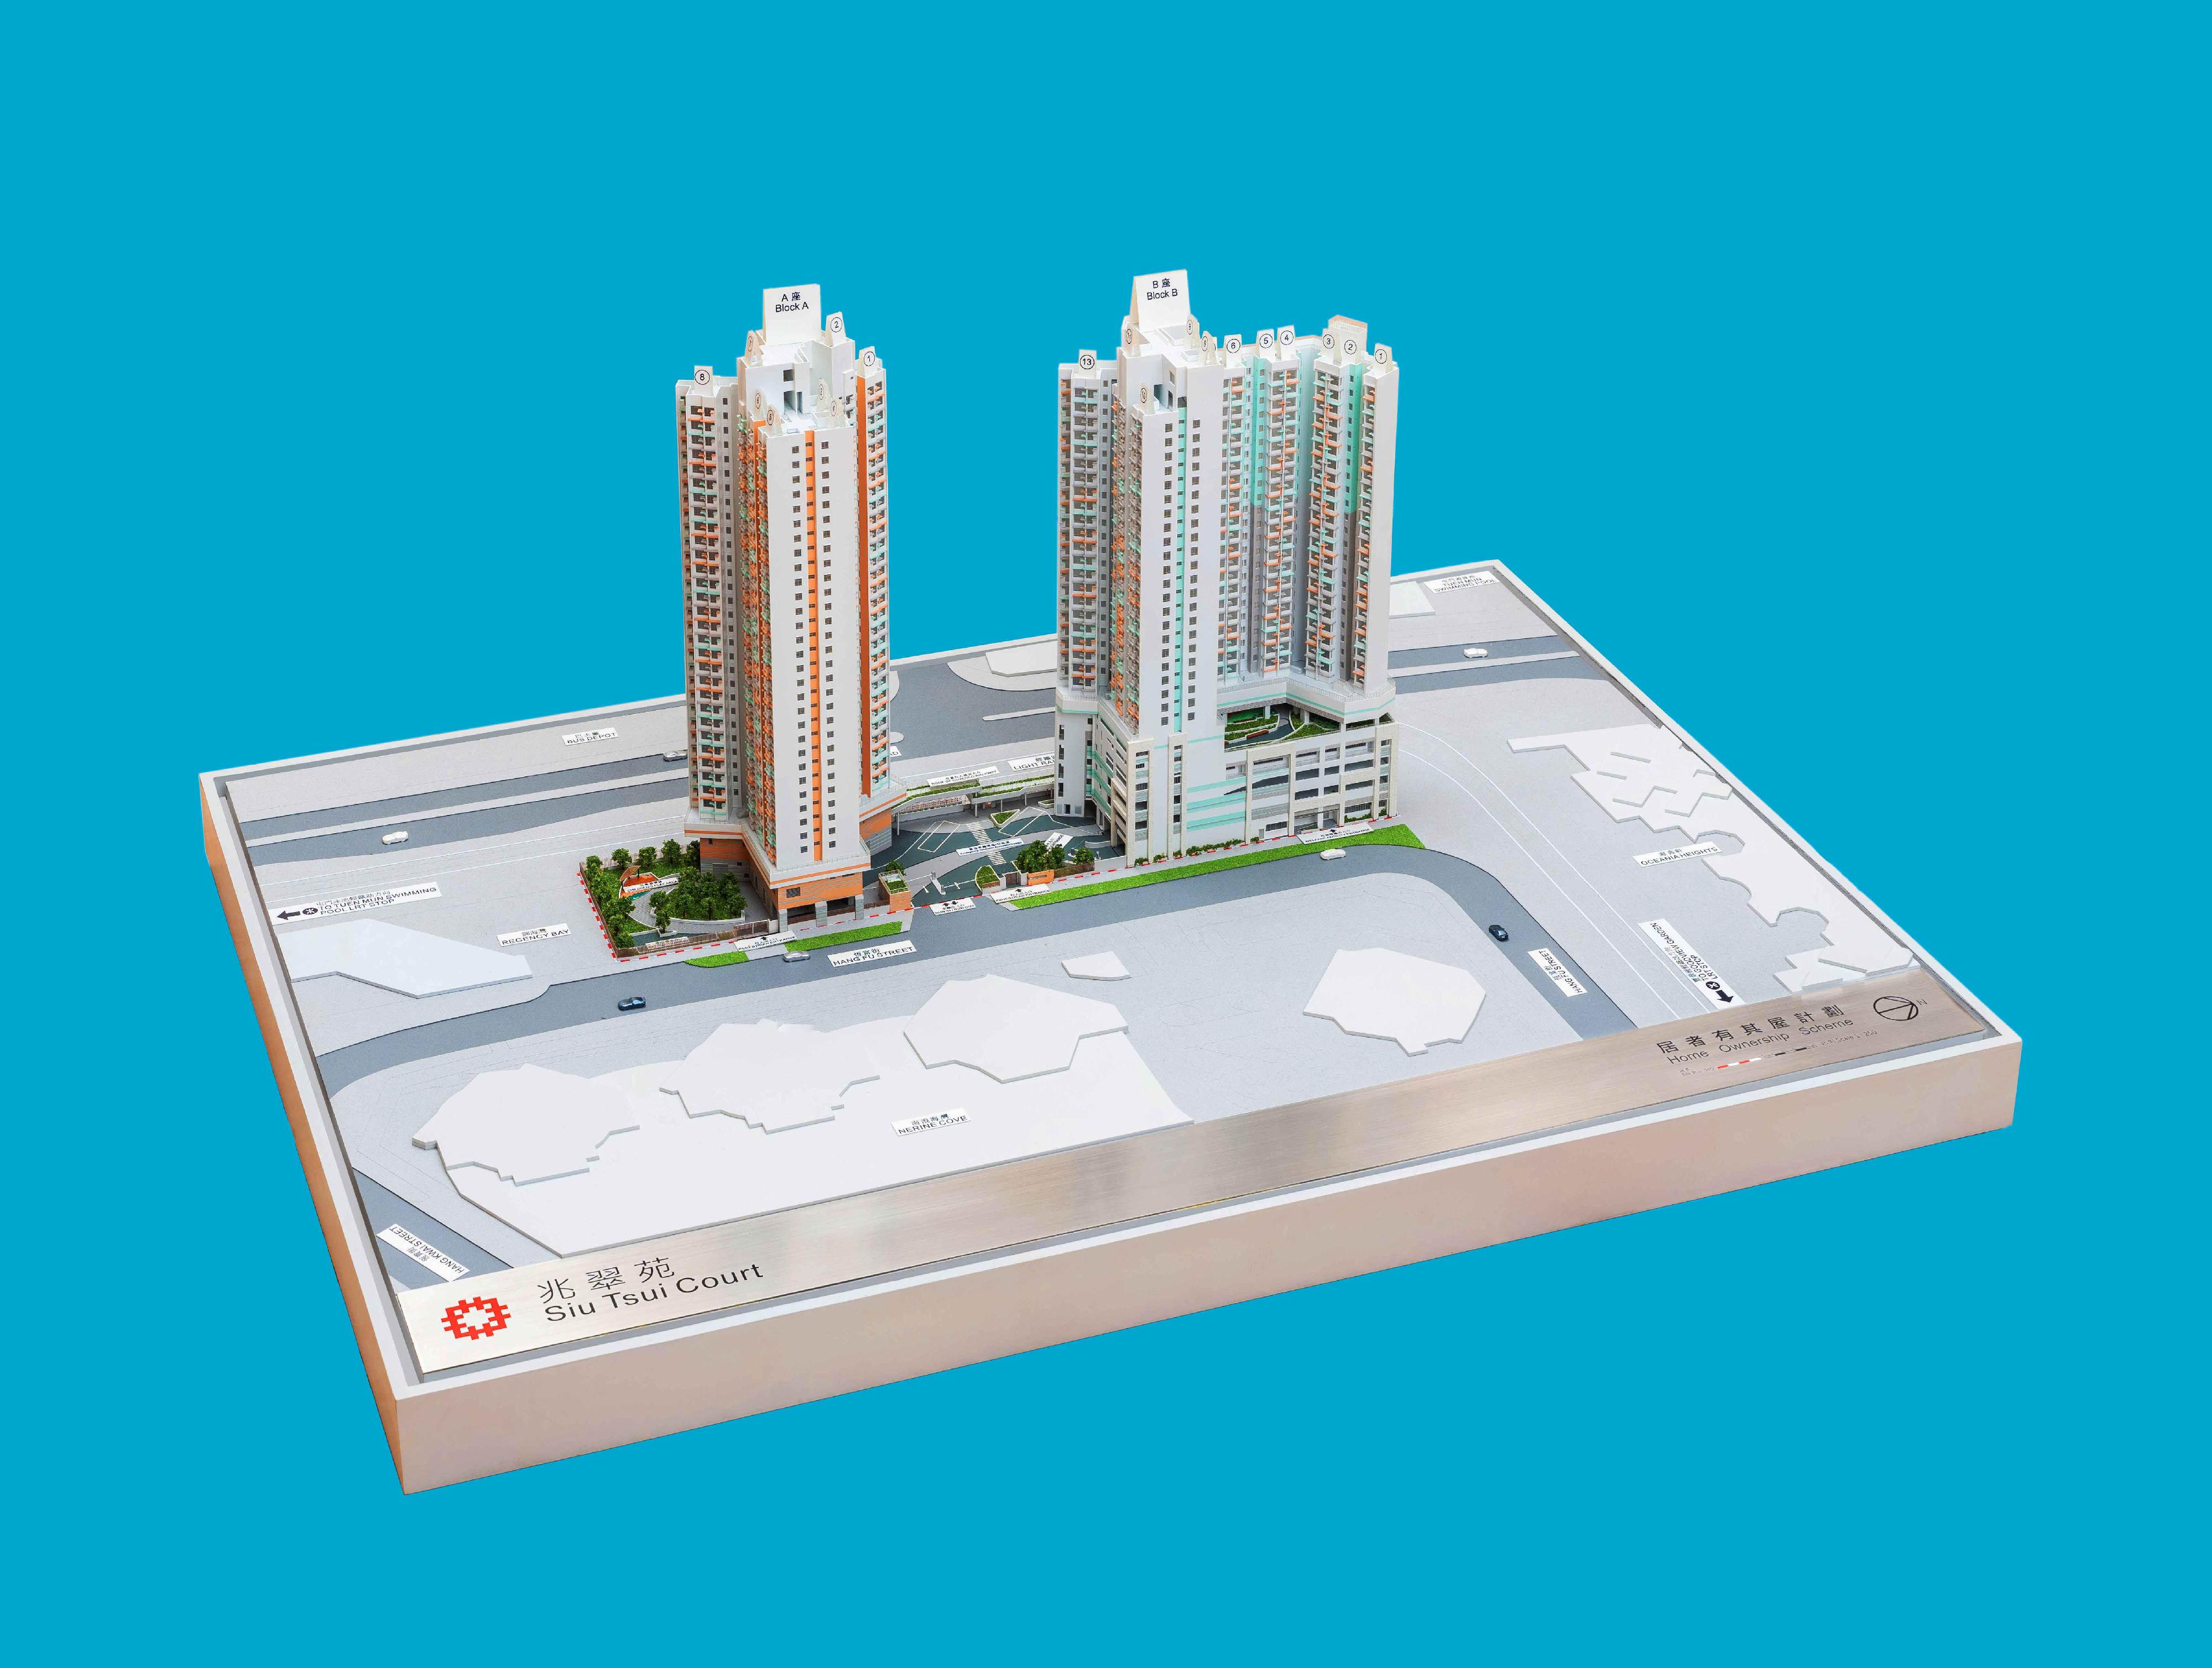 Applications for purchase under the Sale of Home Ownership Scheme Flats 2023 will start on July 31. Photo shows a model of Siu Tsui Court, a new development project under the scheme.




